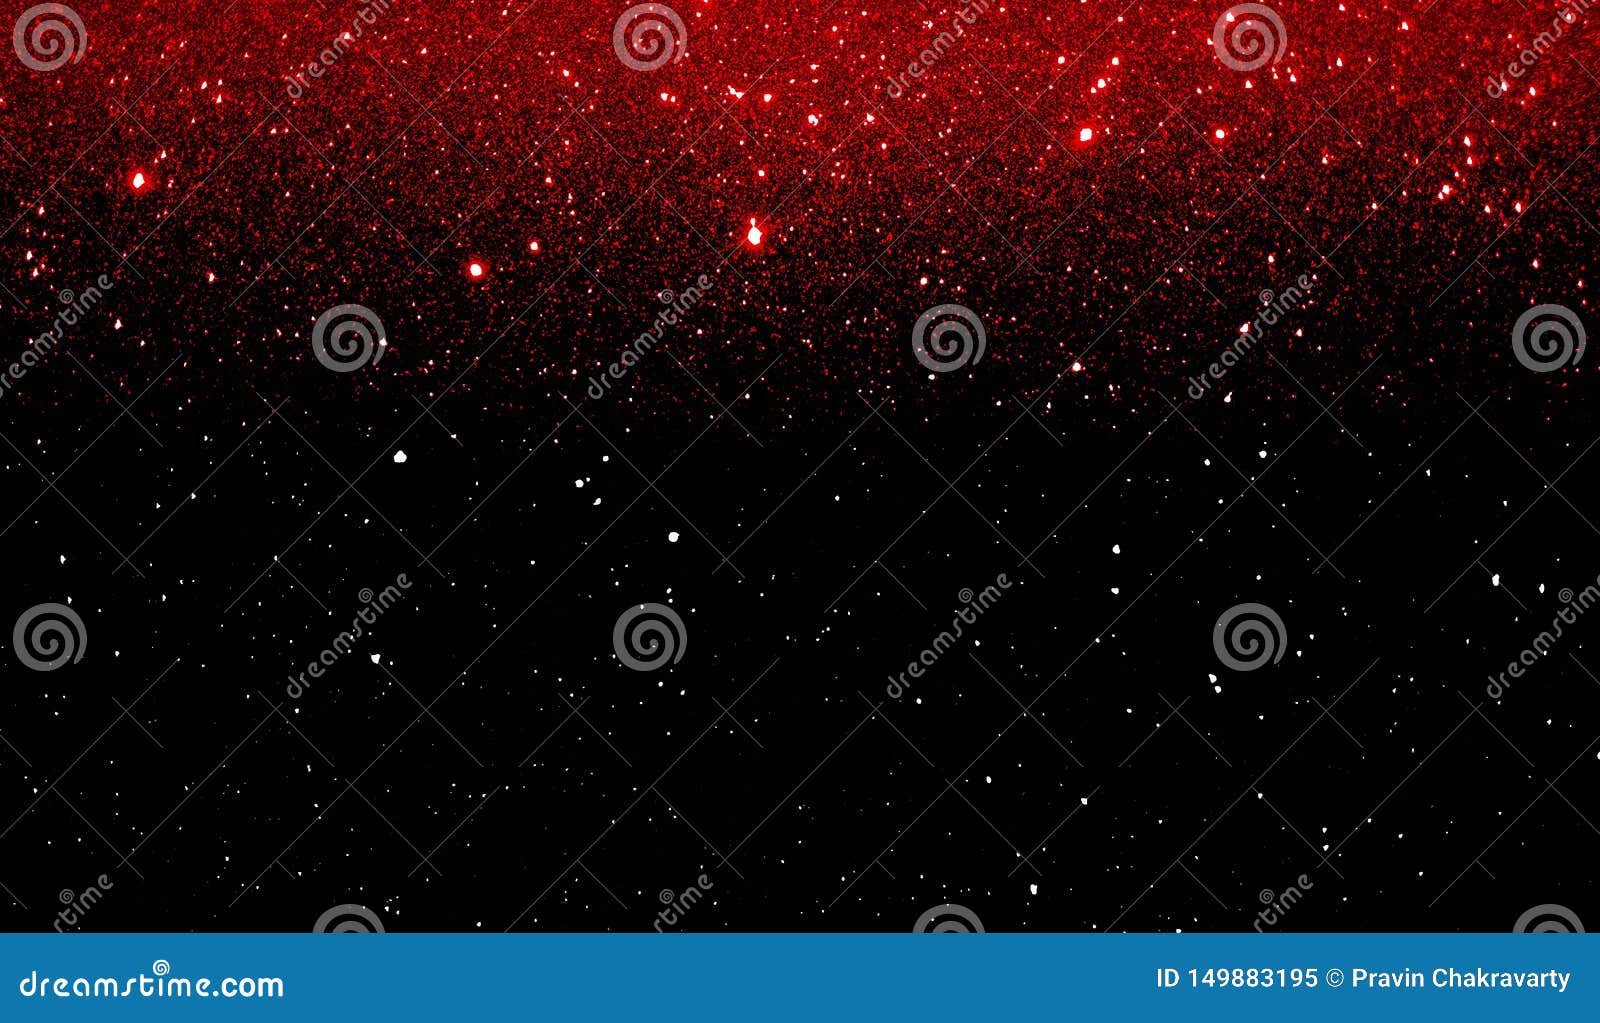 Dark red glitter texture, Free backgrounds and textures